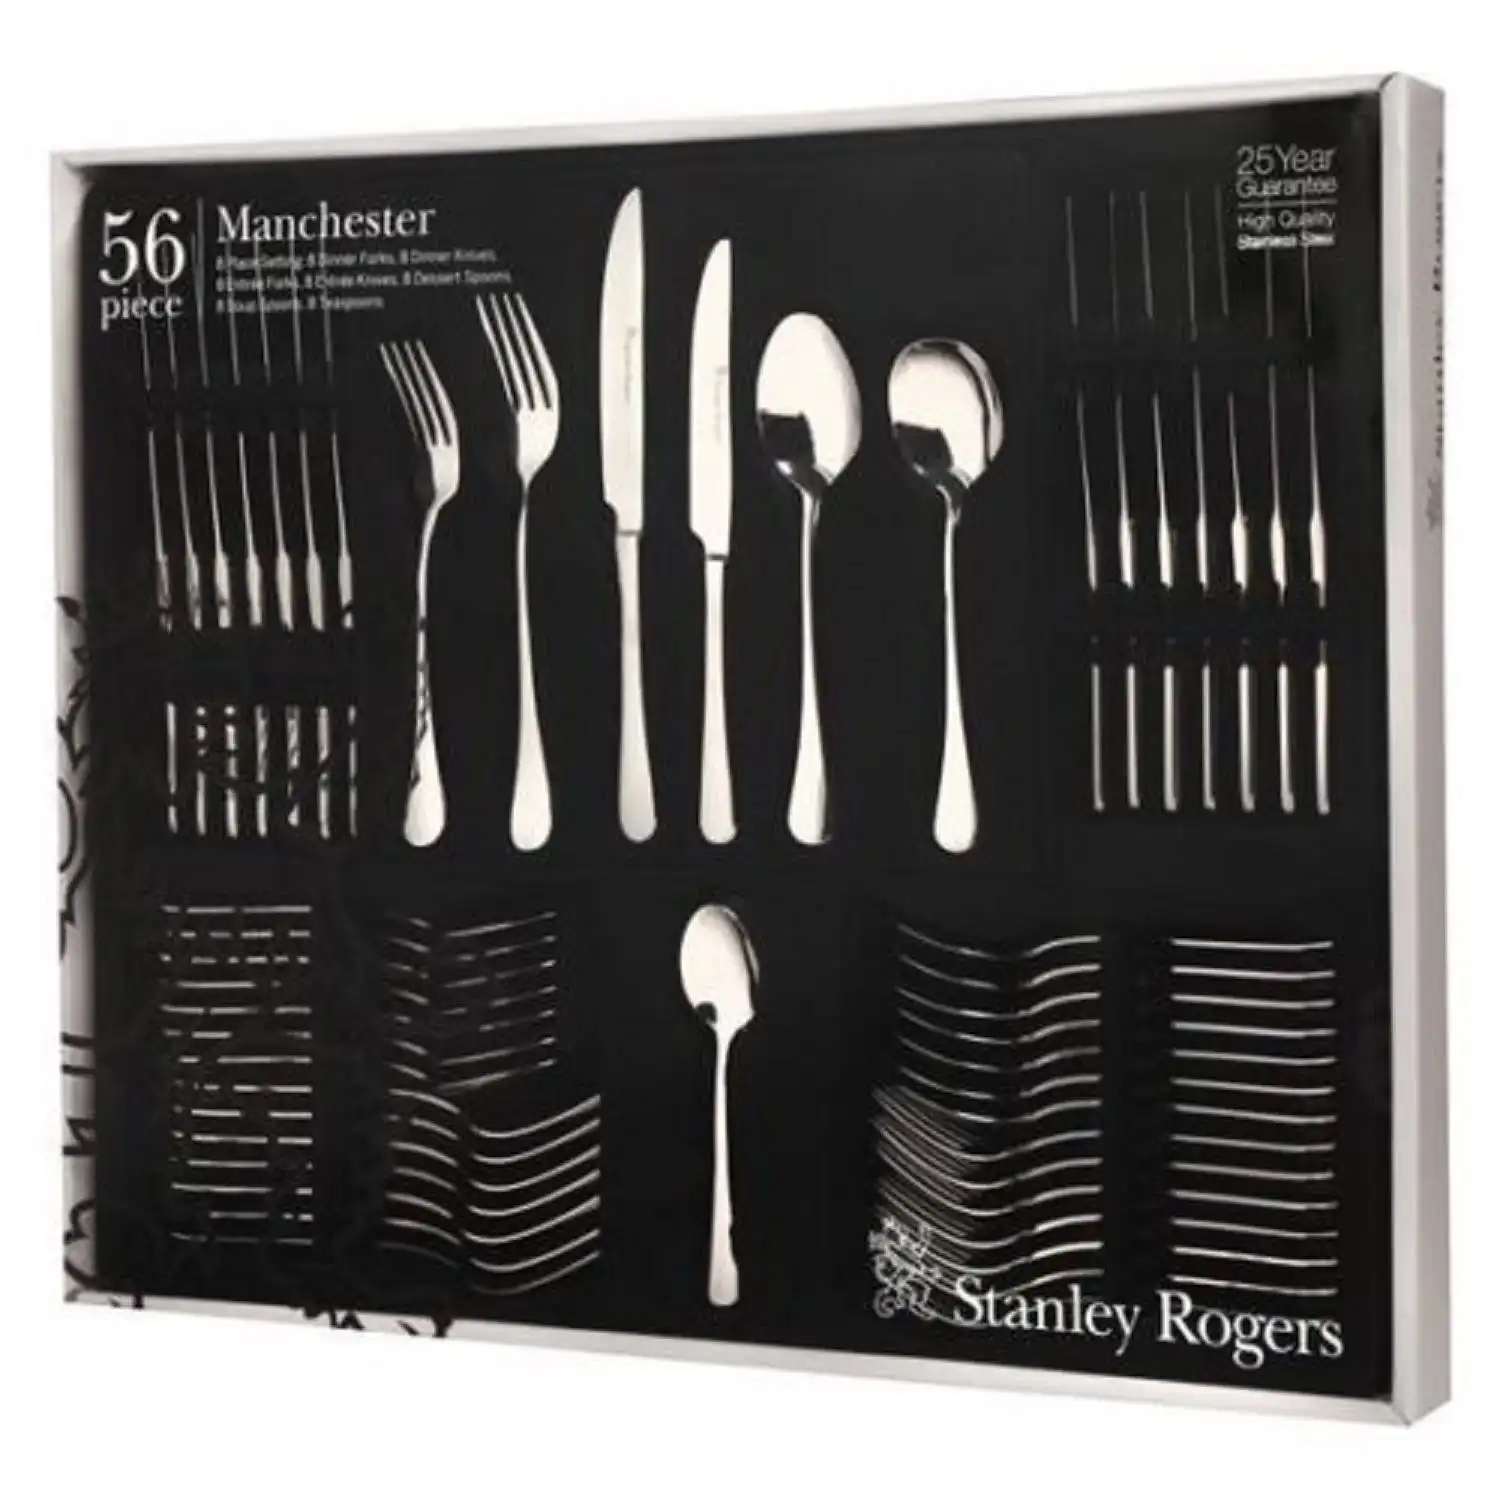 Stanley Rogers 56 Piece Manchester Cutlery Gift Boxed Set